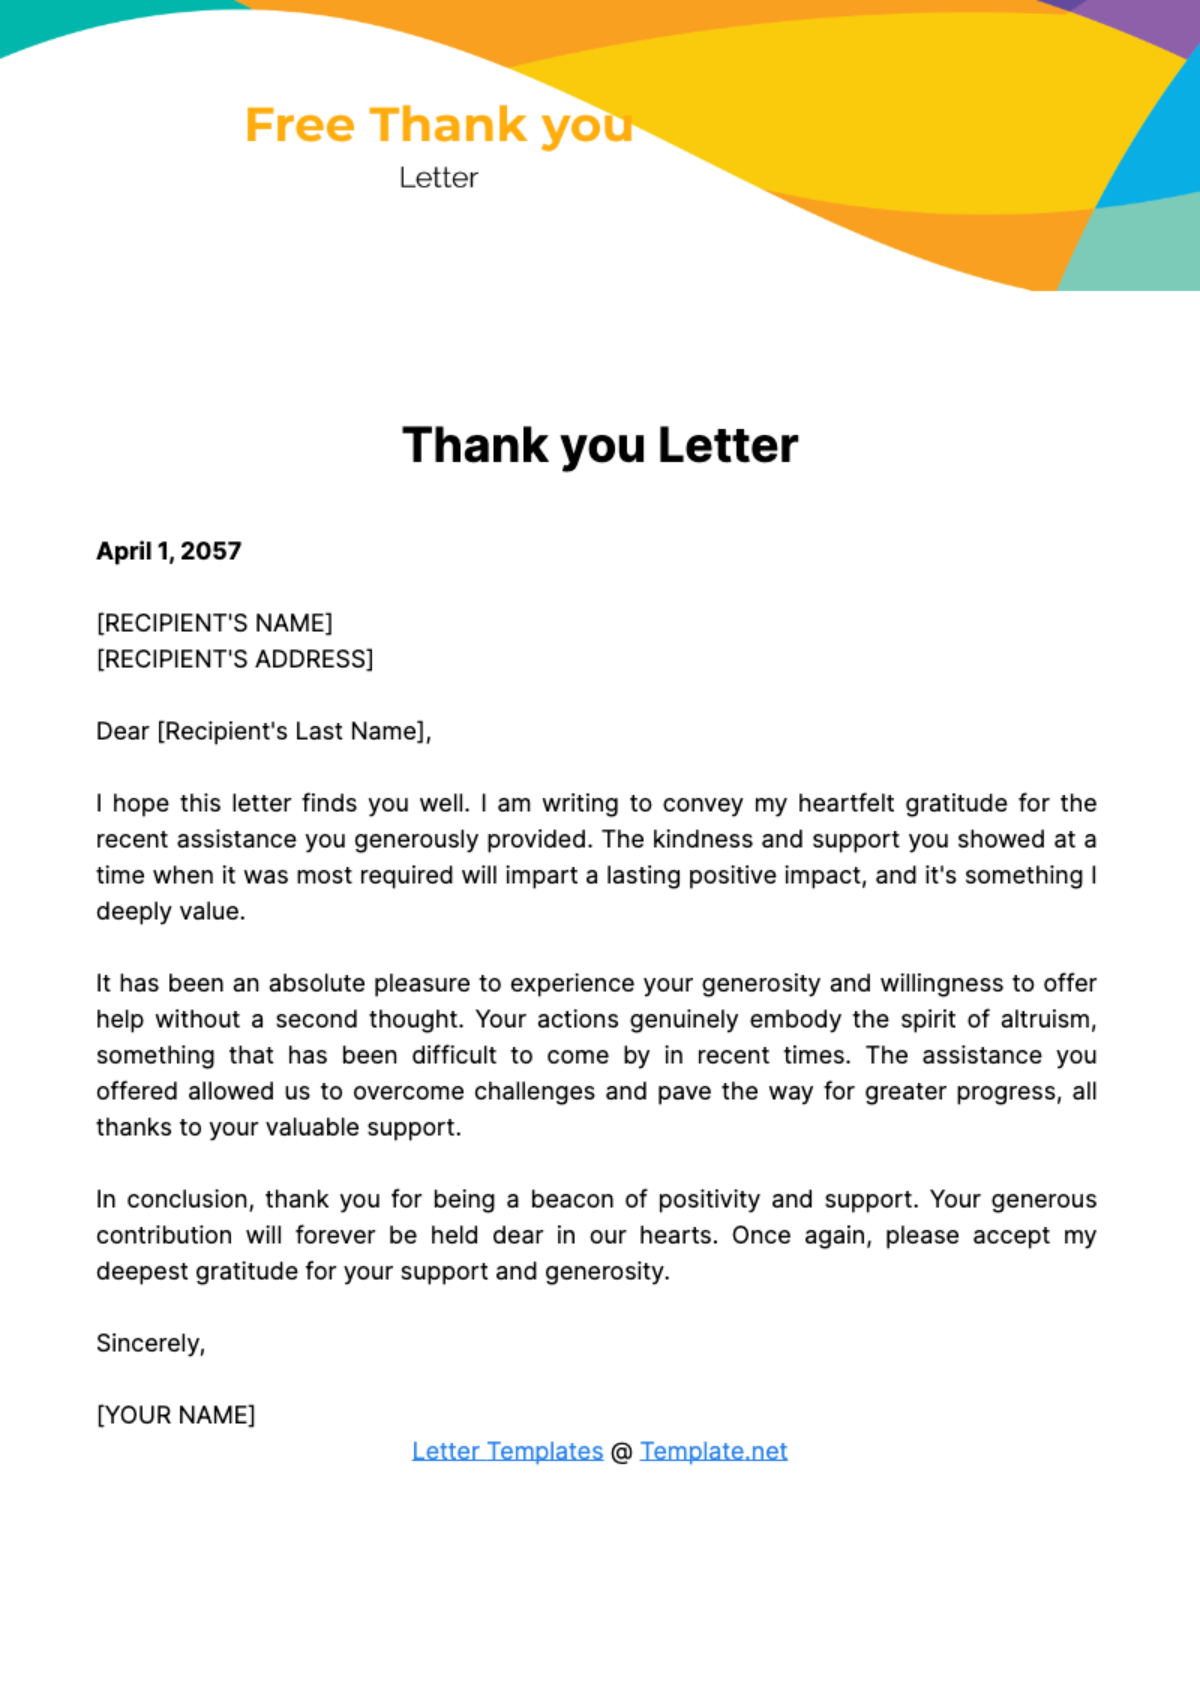 Thank you Letter Template